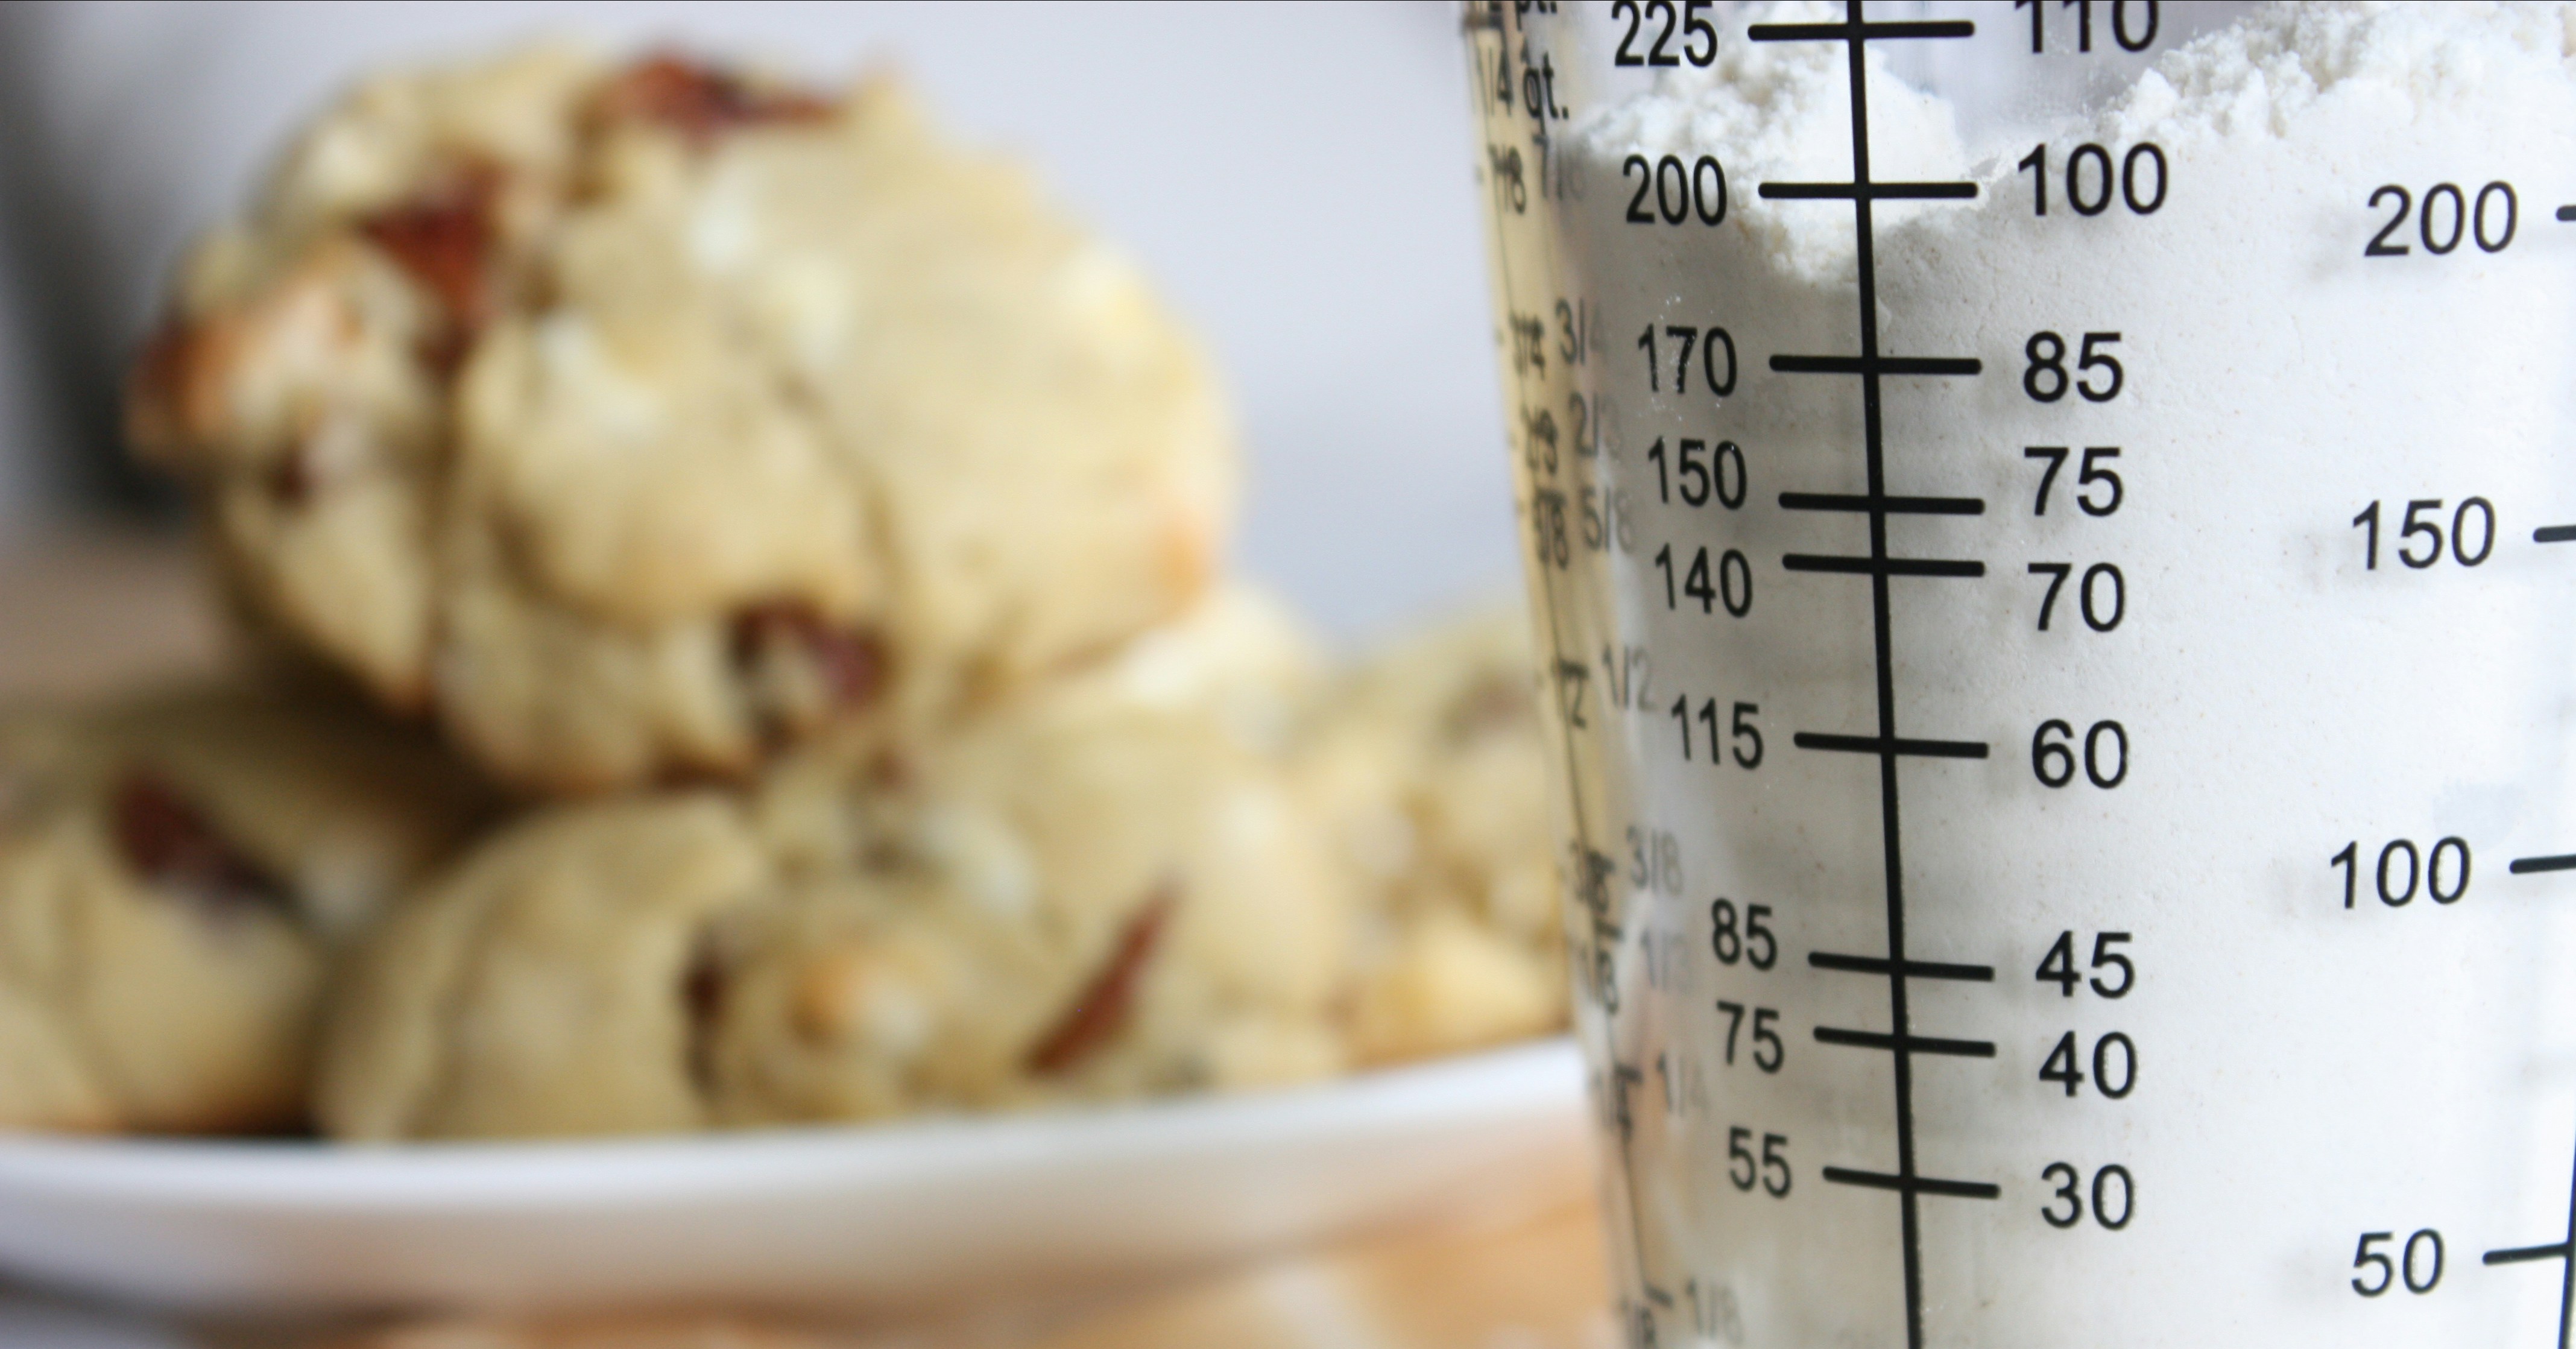 What is 300 grams in cups? · Cooking Measurements & Conversion Chart